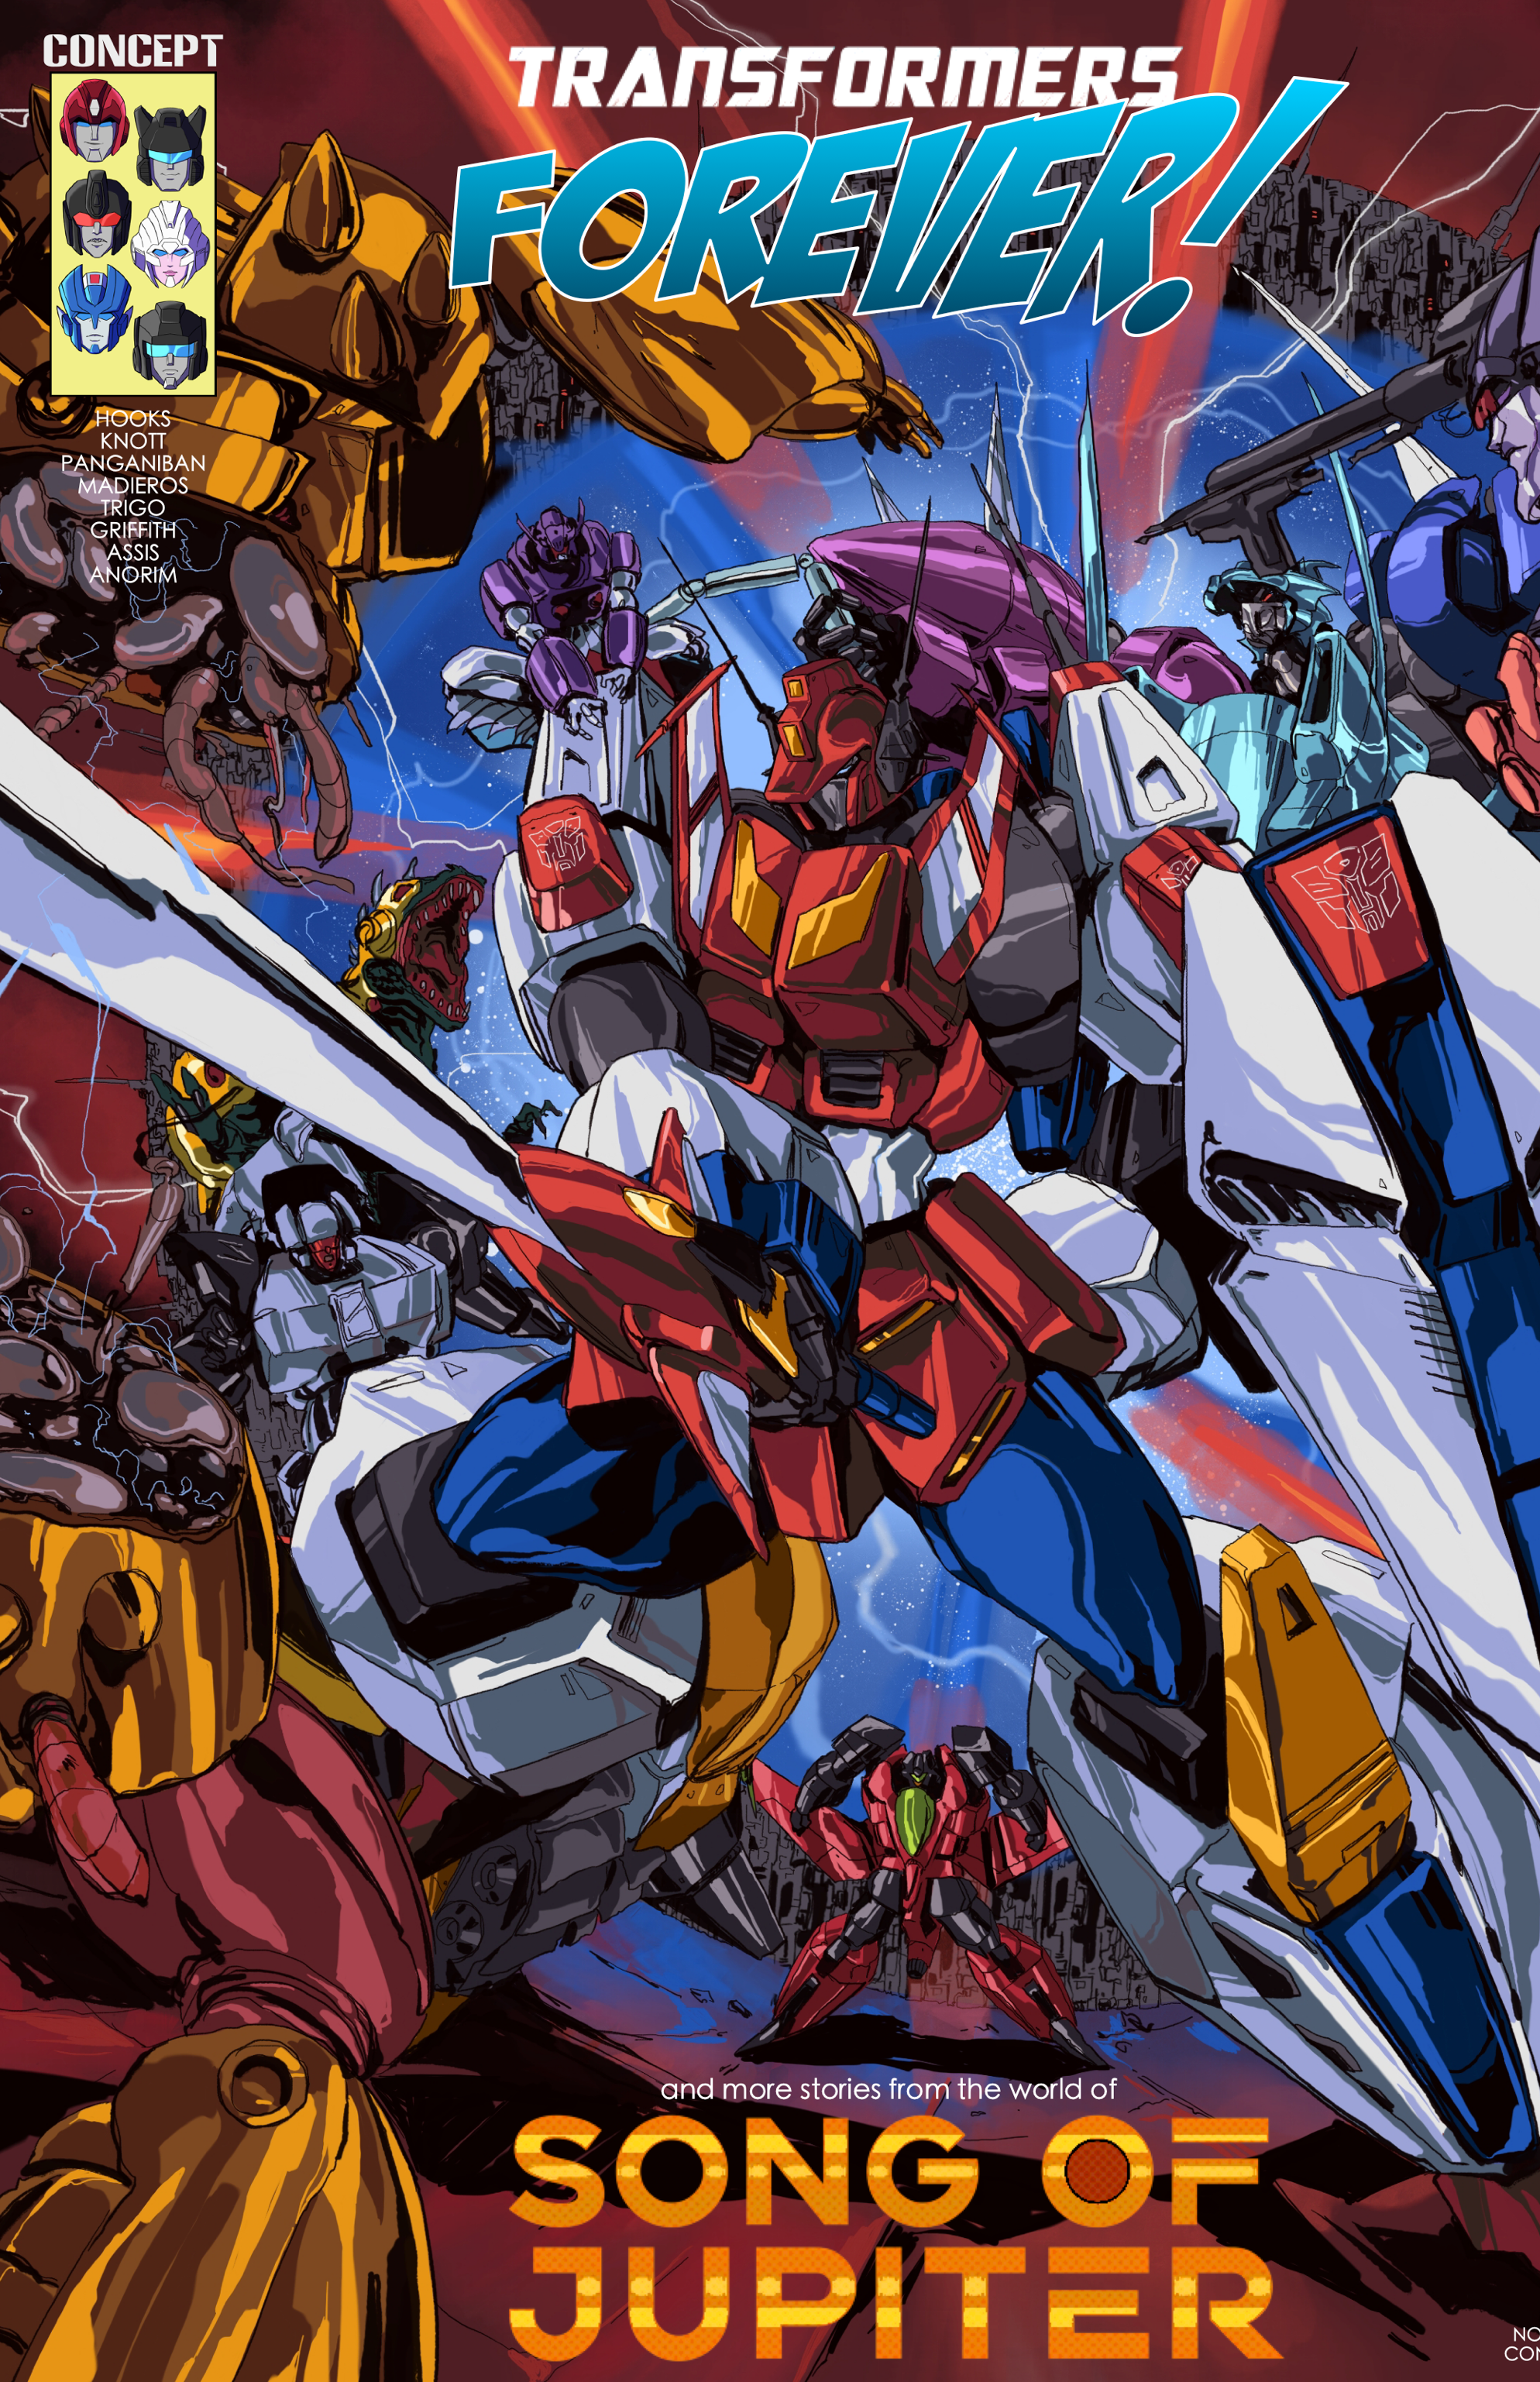 Transformers: Forever #1 | Song of Jupiter Special Edition